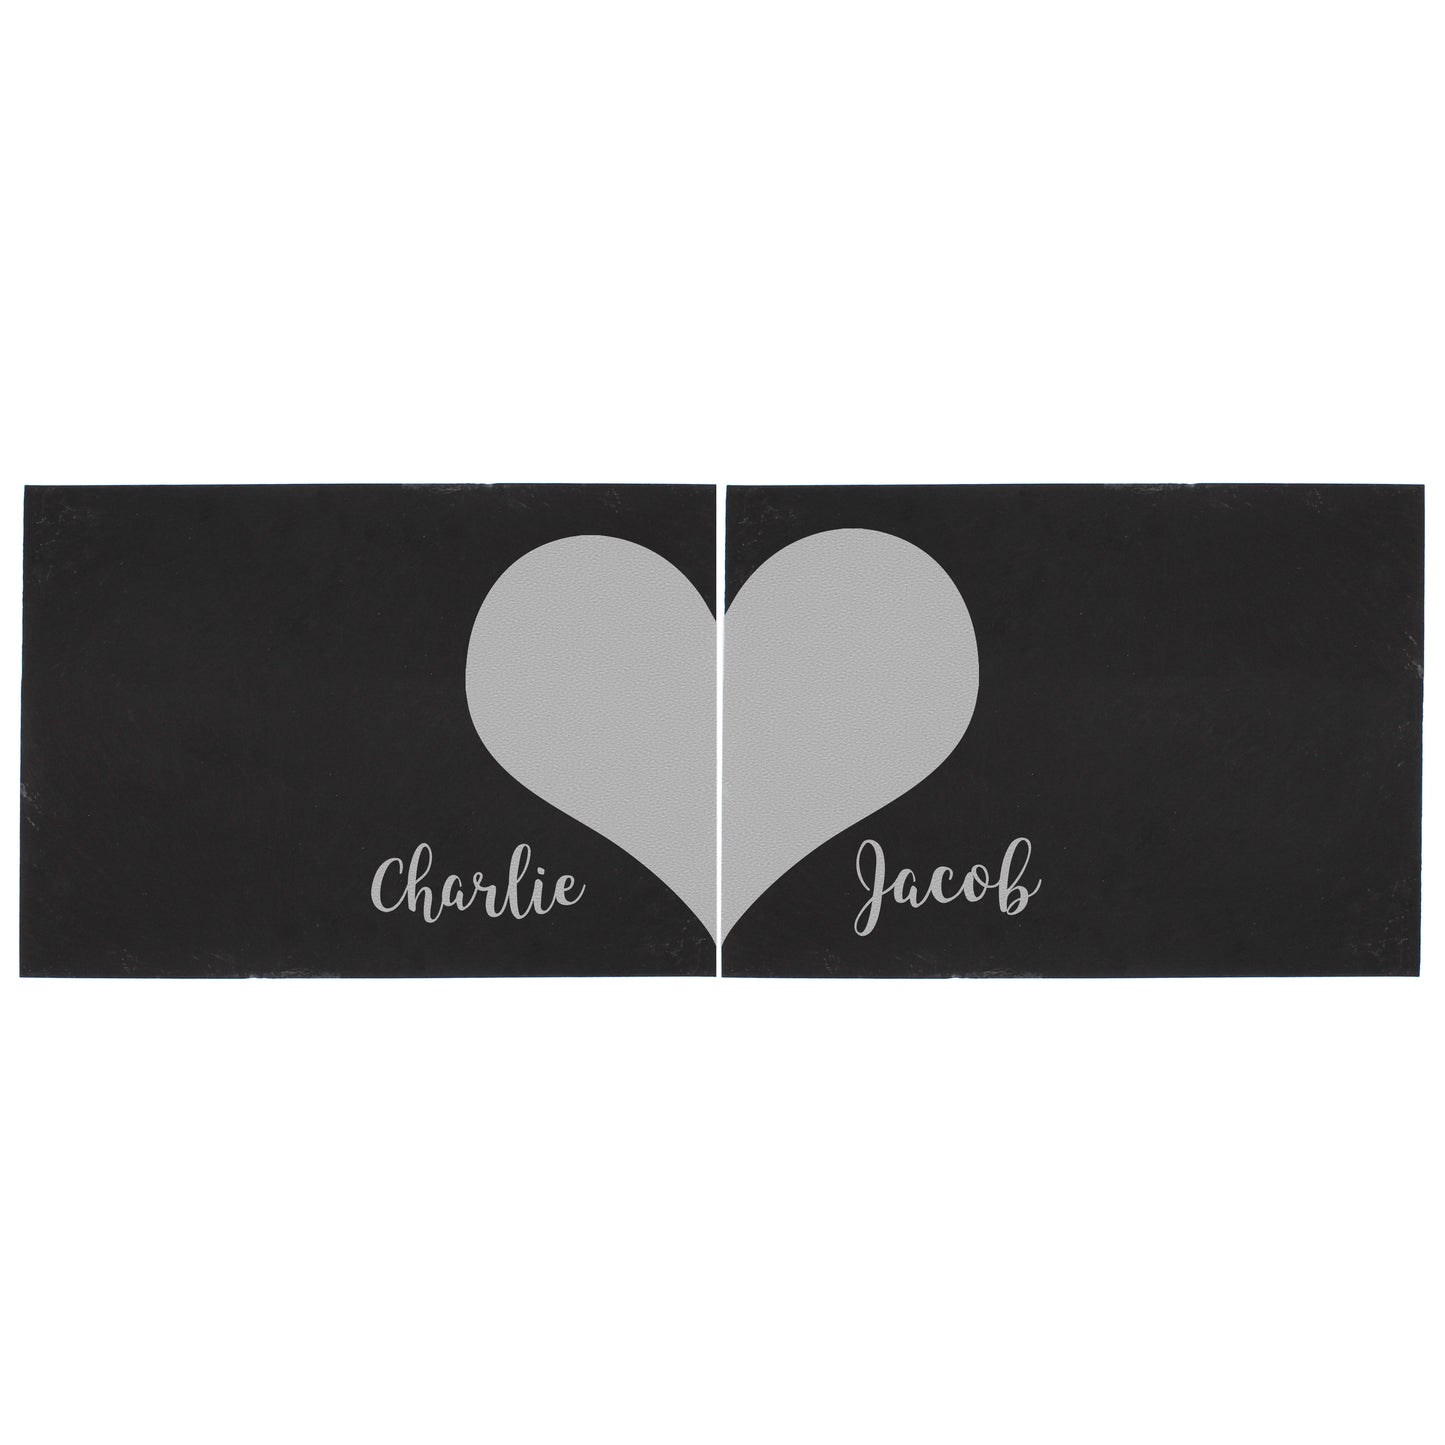 Personalised Slate Placements Pair - Heart - Violet Belle Gifts - Personalised Pair Slate Placements - Heart